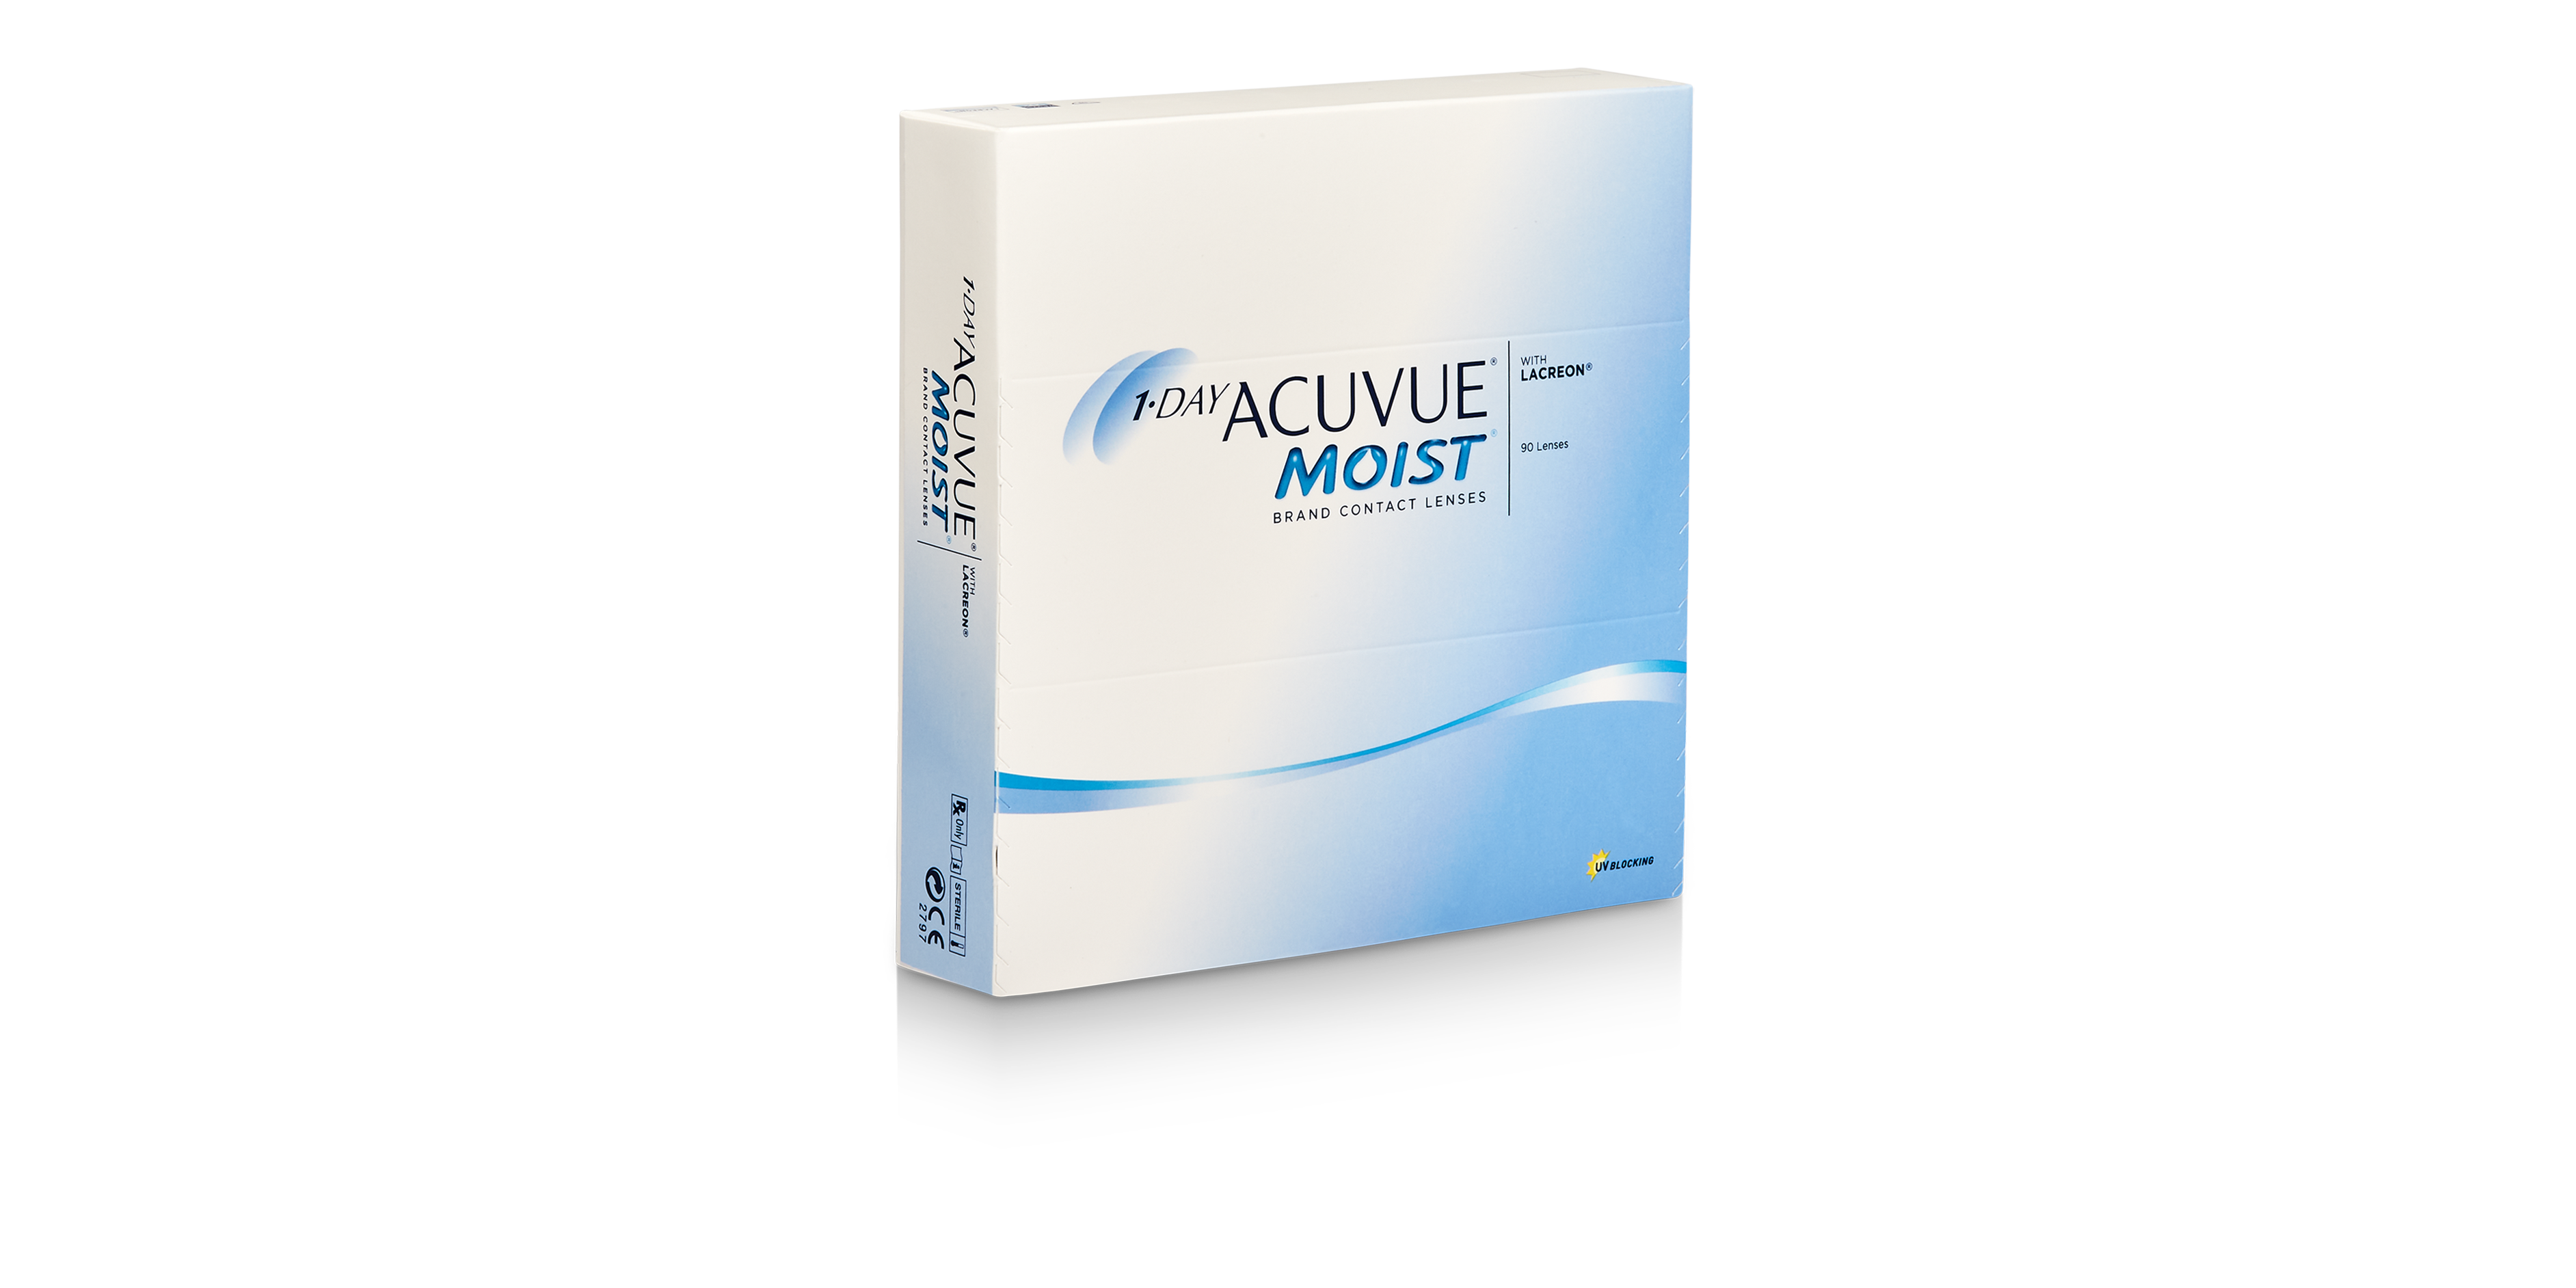 1-DAY ACUVUE® MOIST, 90 pack